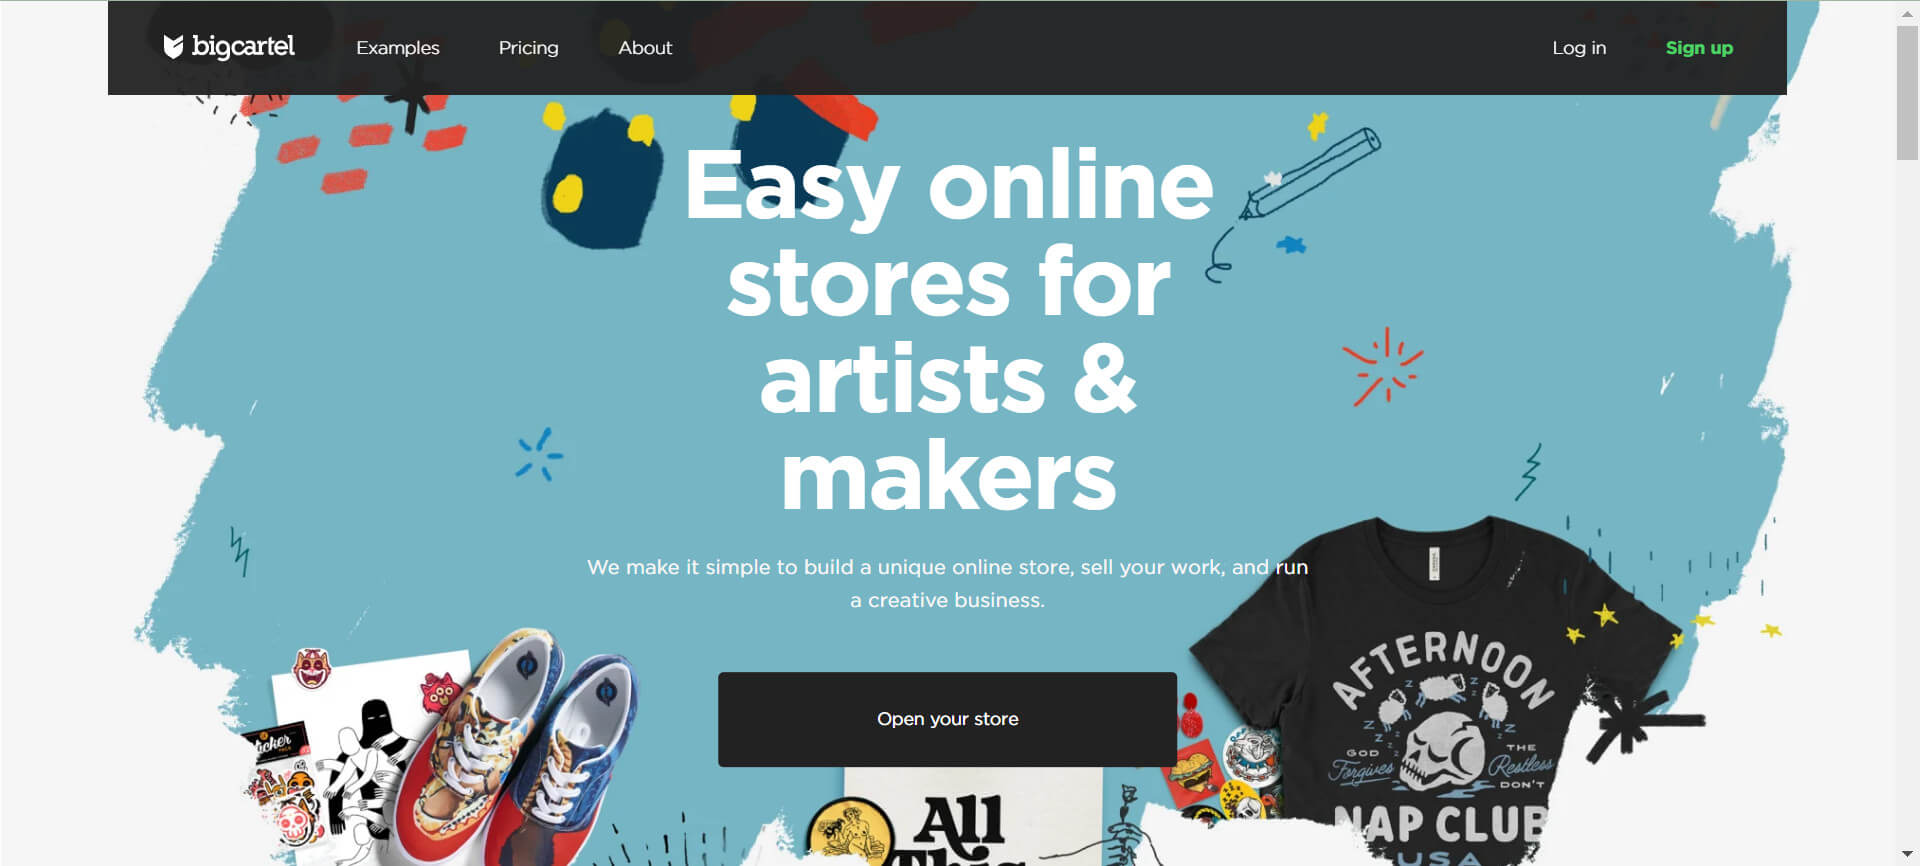 Big Cartel lets you build an independent online store with your own branding